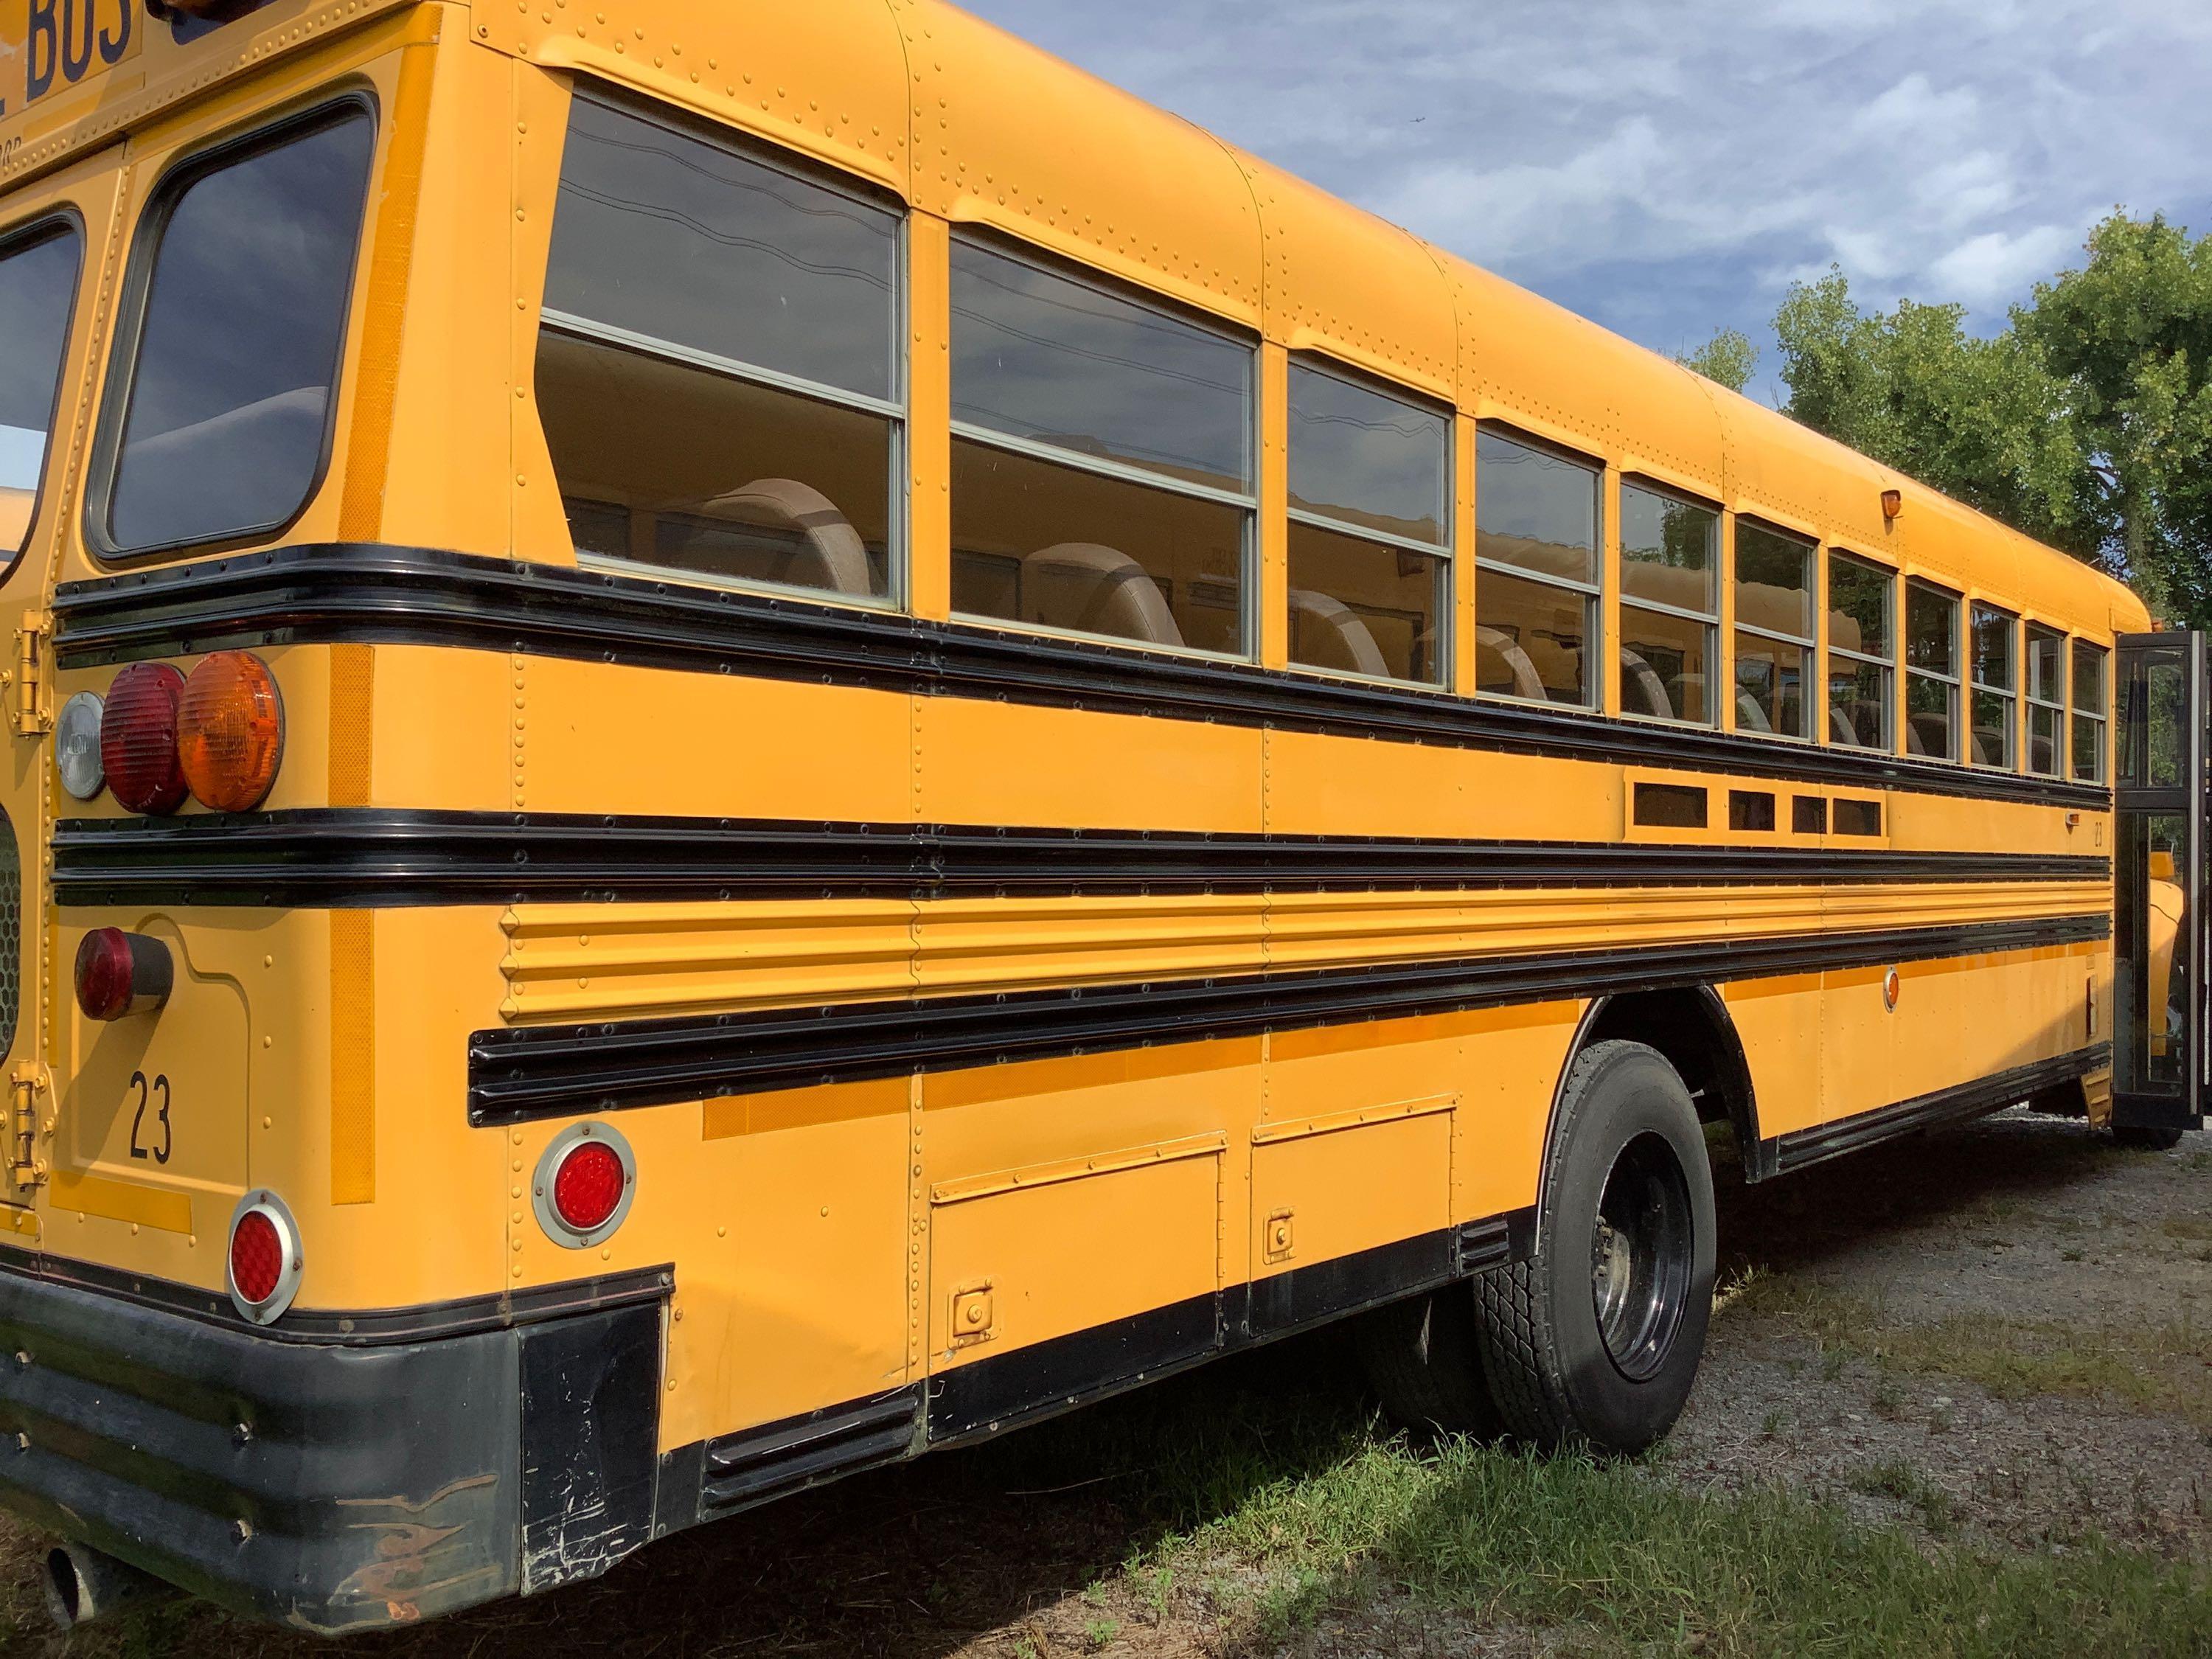 1996 International School Bus (County of Middlesex Unit #23)